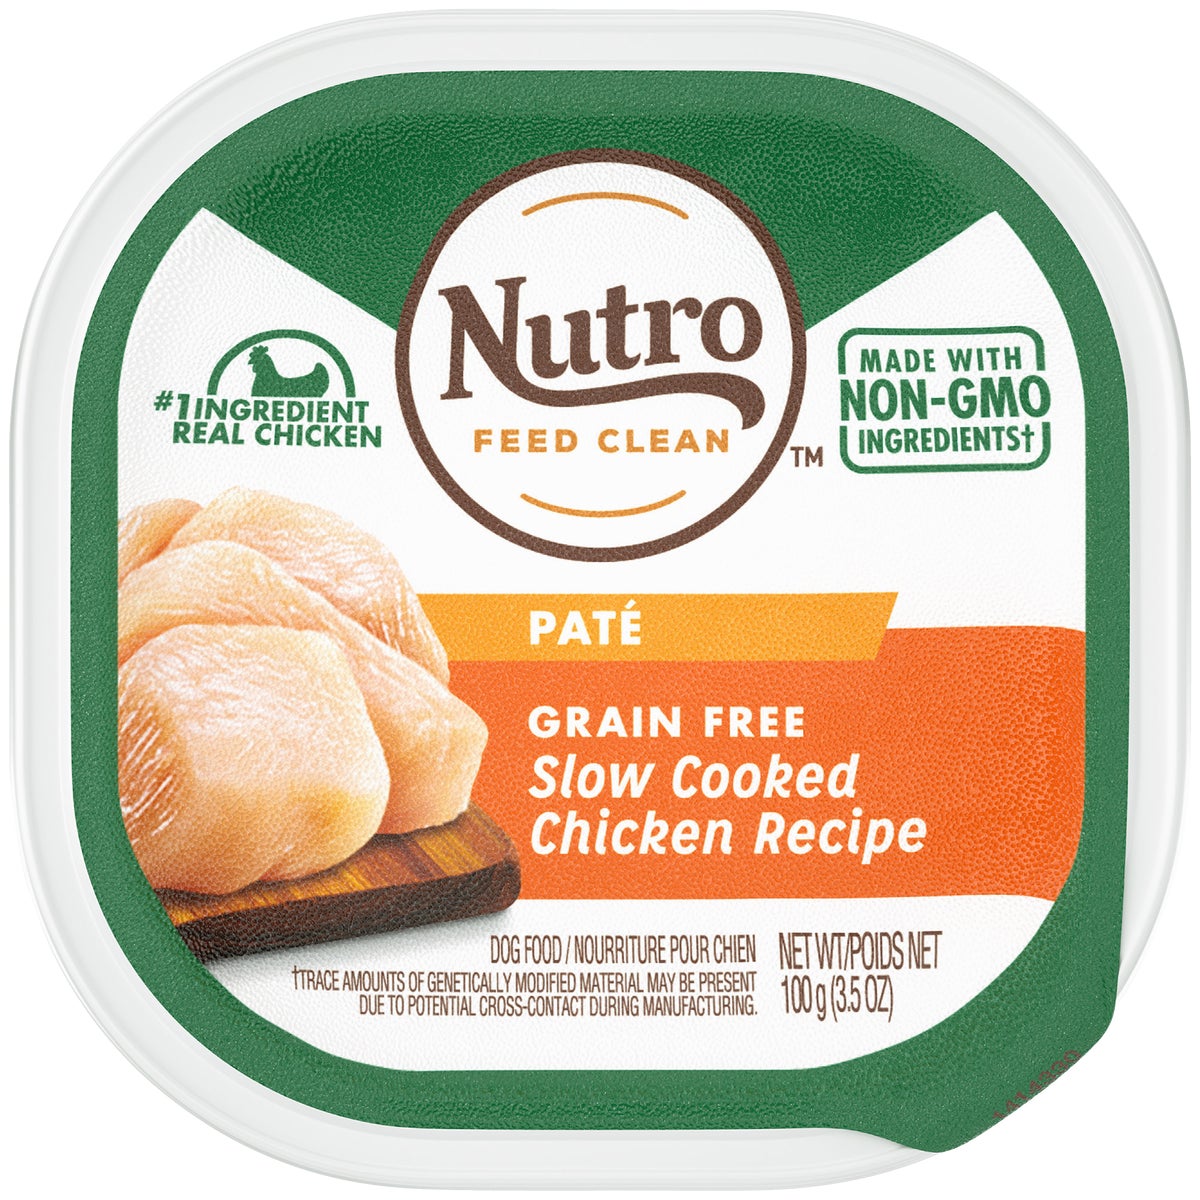 Nutro Grain Free Slow Cooked Chicken Adult Pate Dog Food, 3.5 Oz.